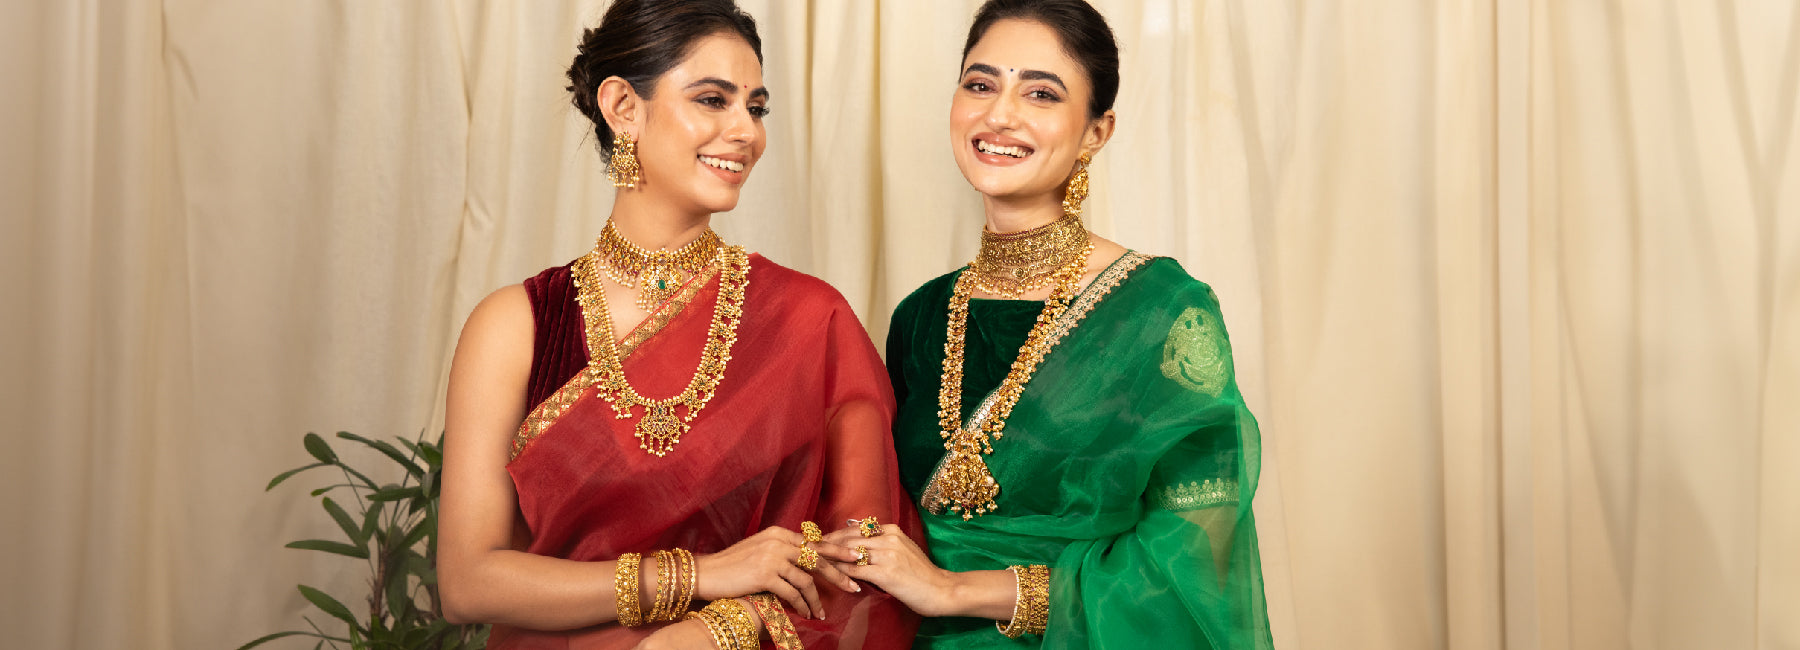 How to Style Temple Jewellery for Different Occasions